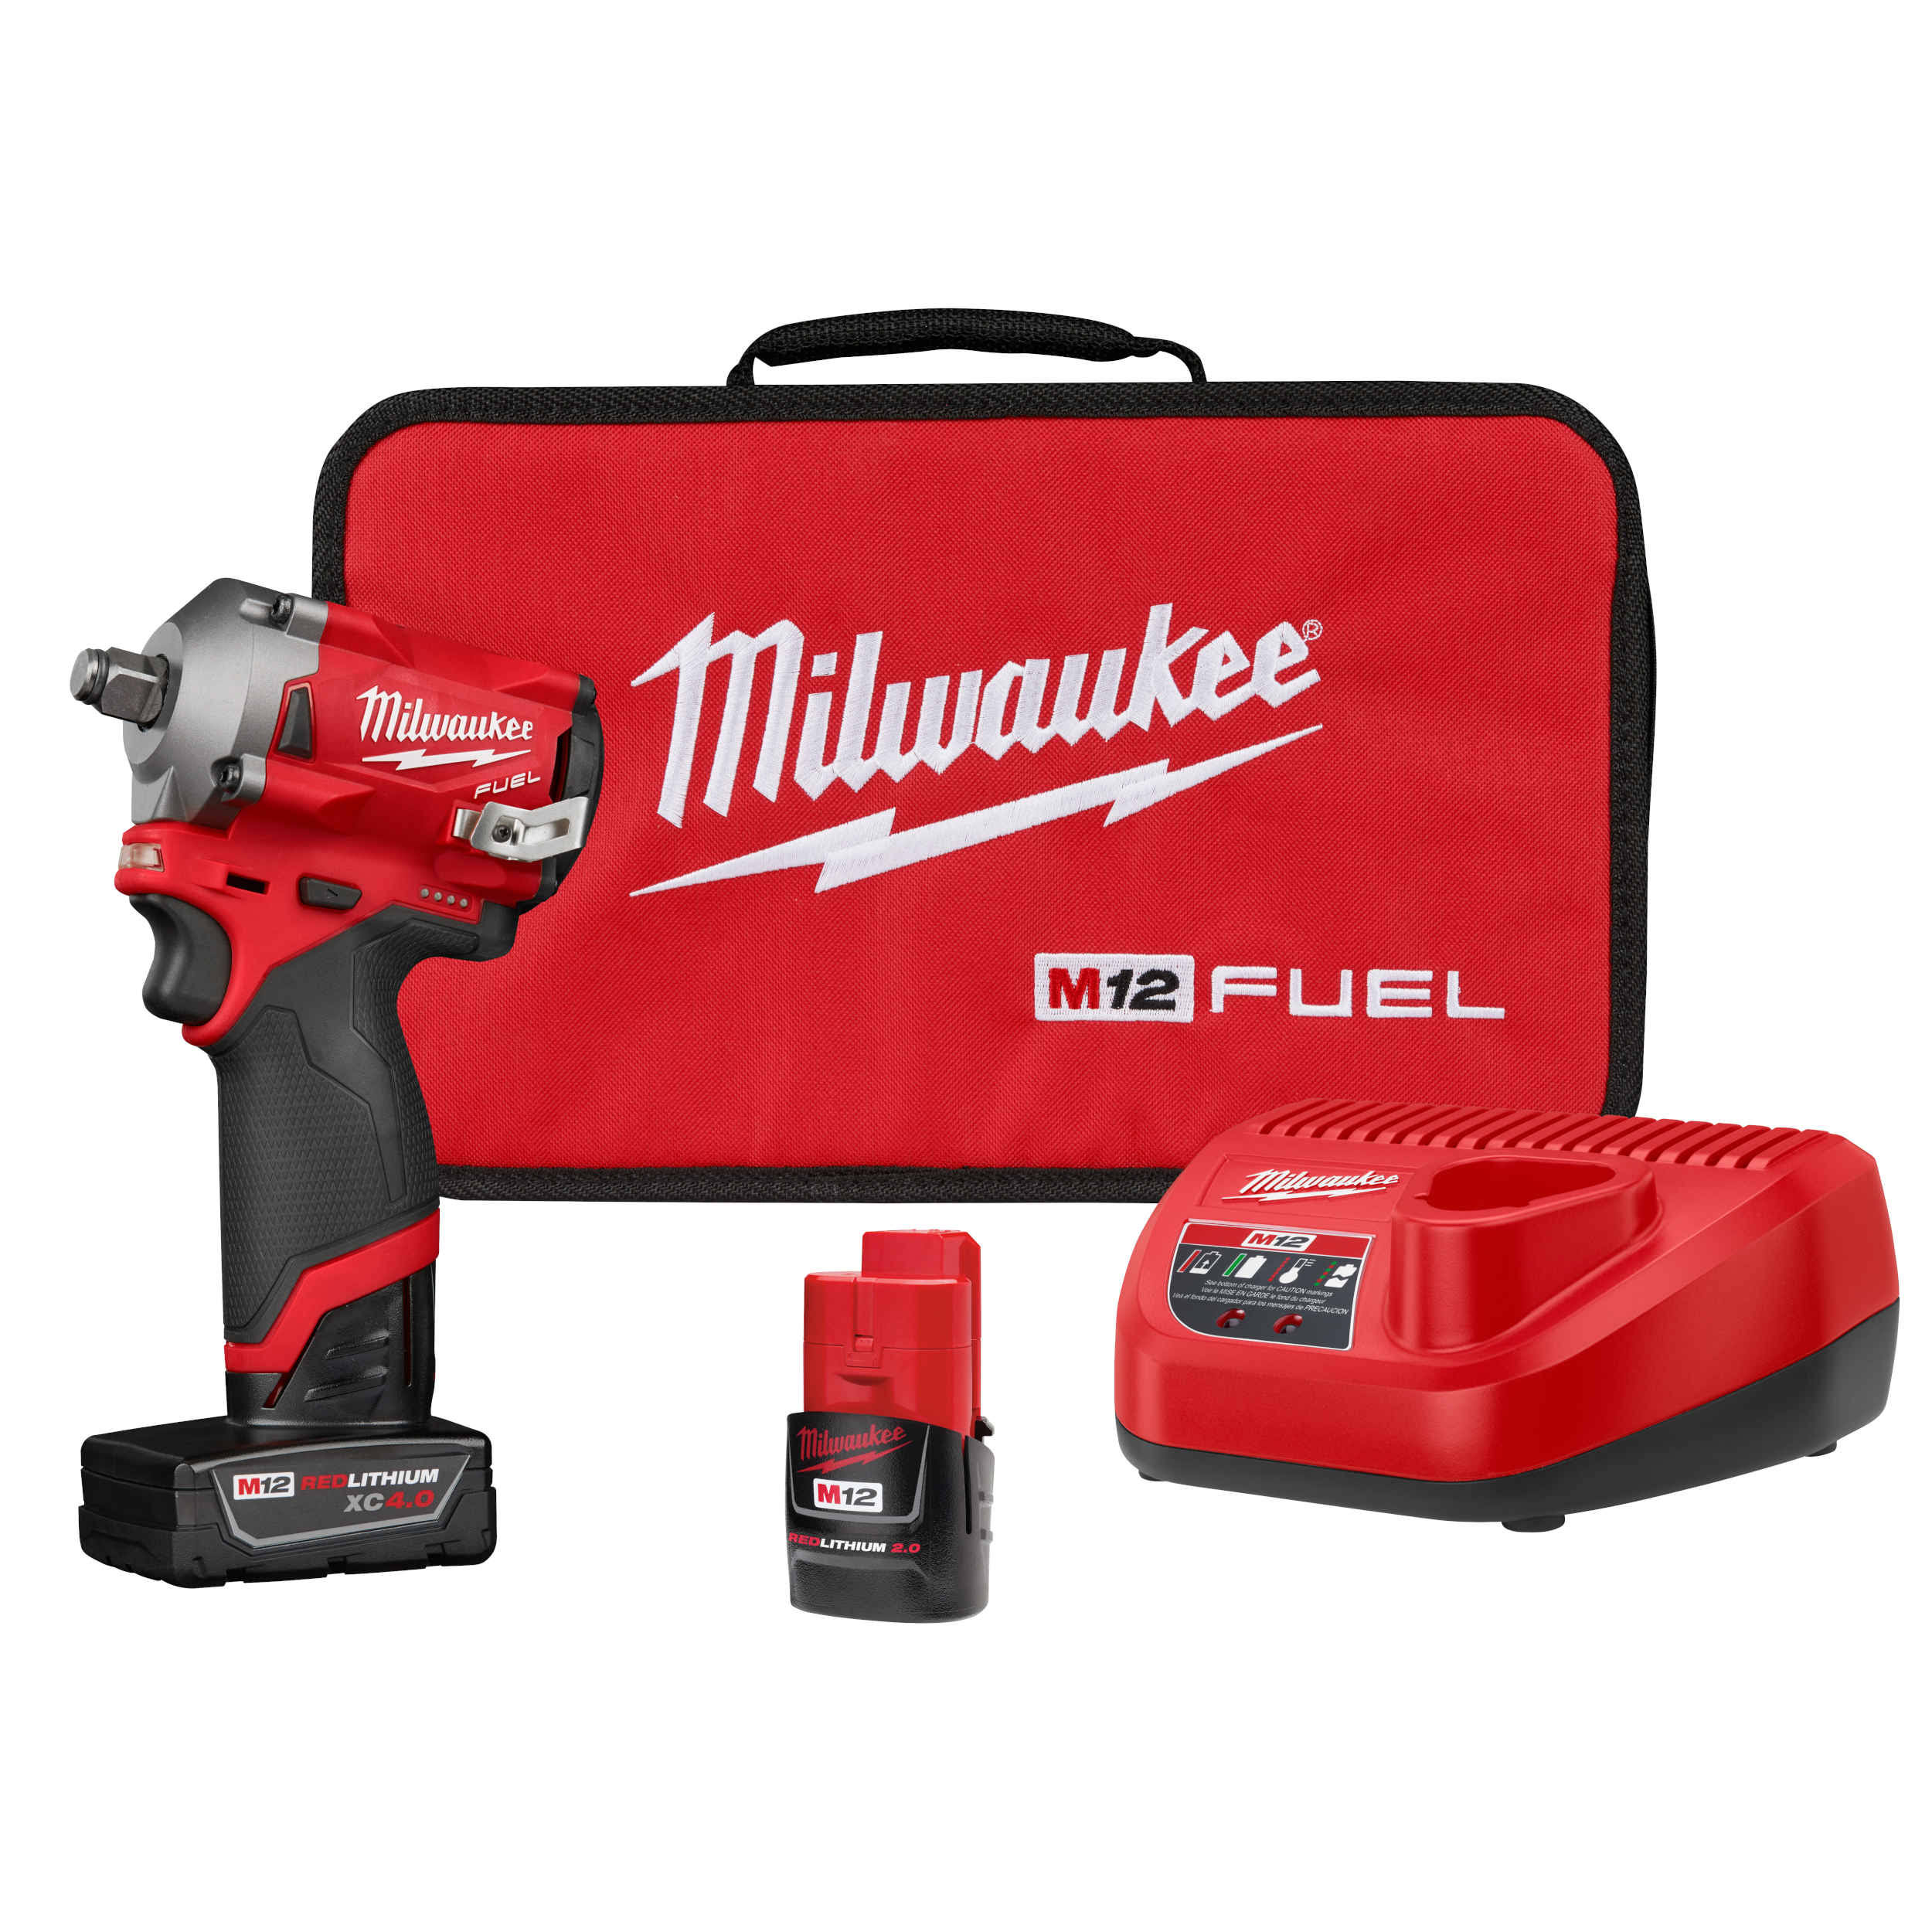 Milwaukee M12 Fuel 1/2 in. Stubby Impact Wrench Kit